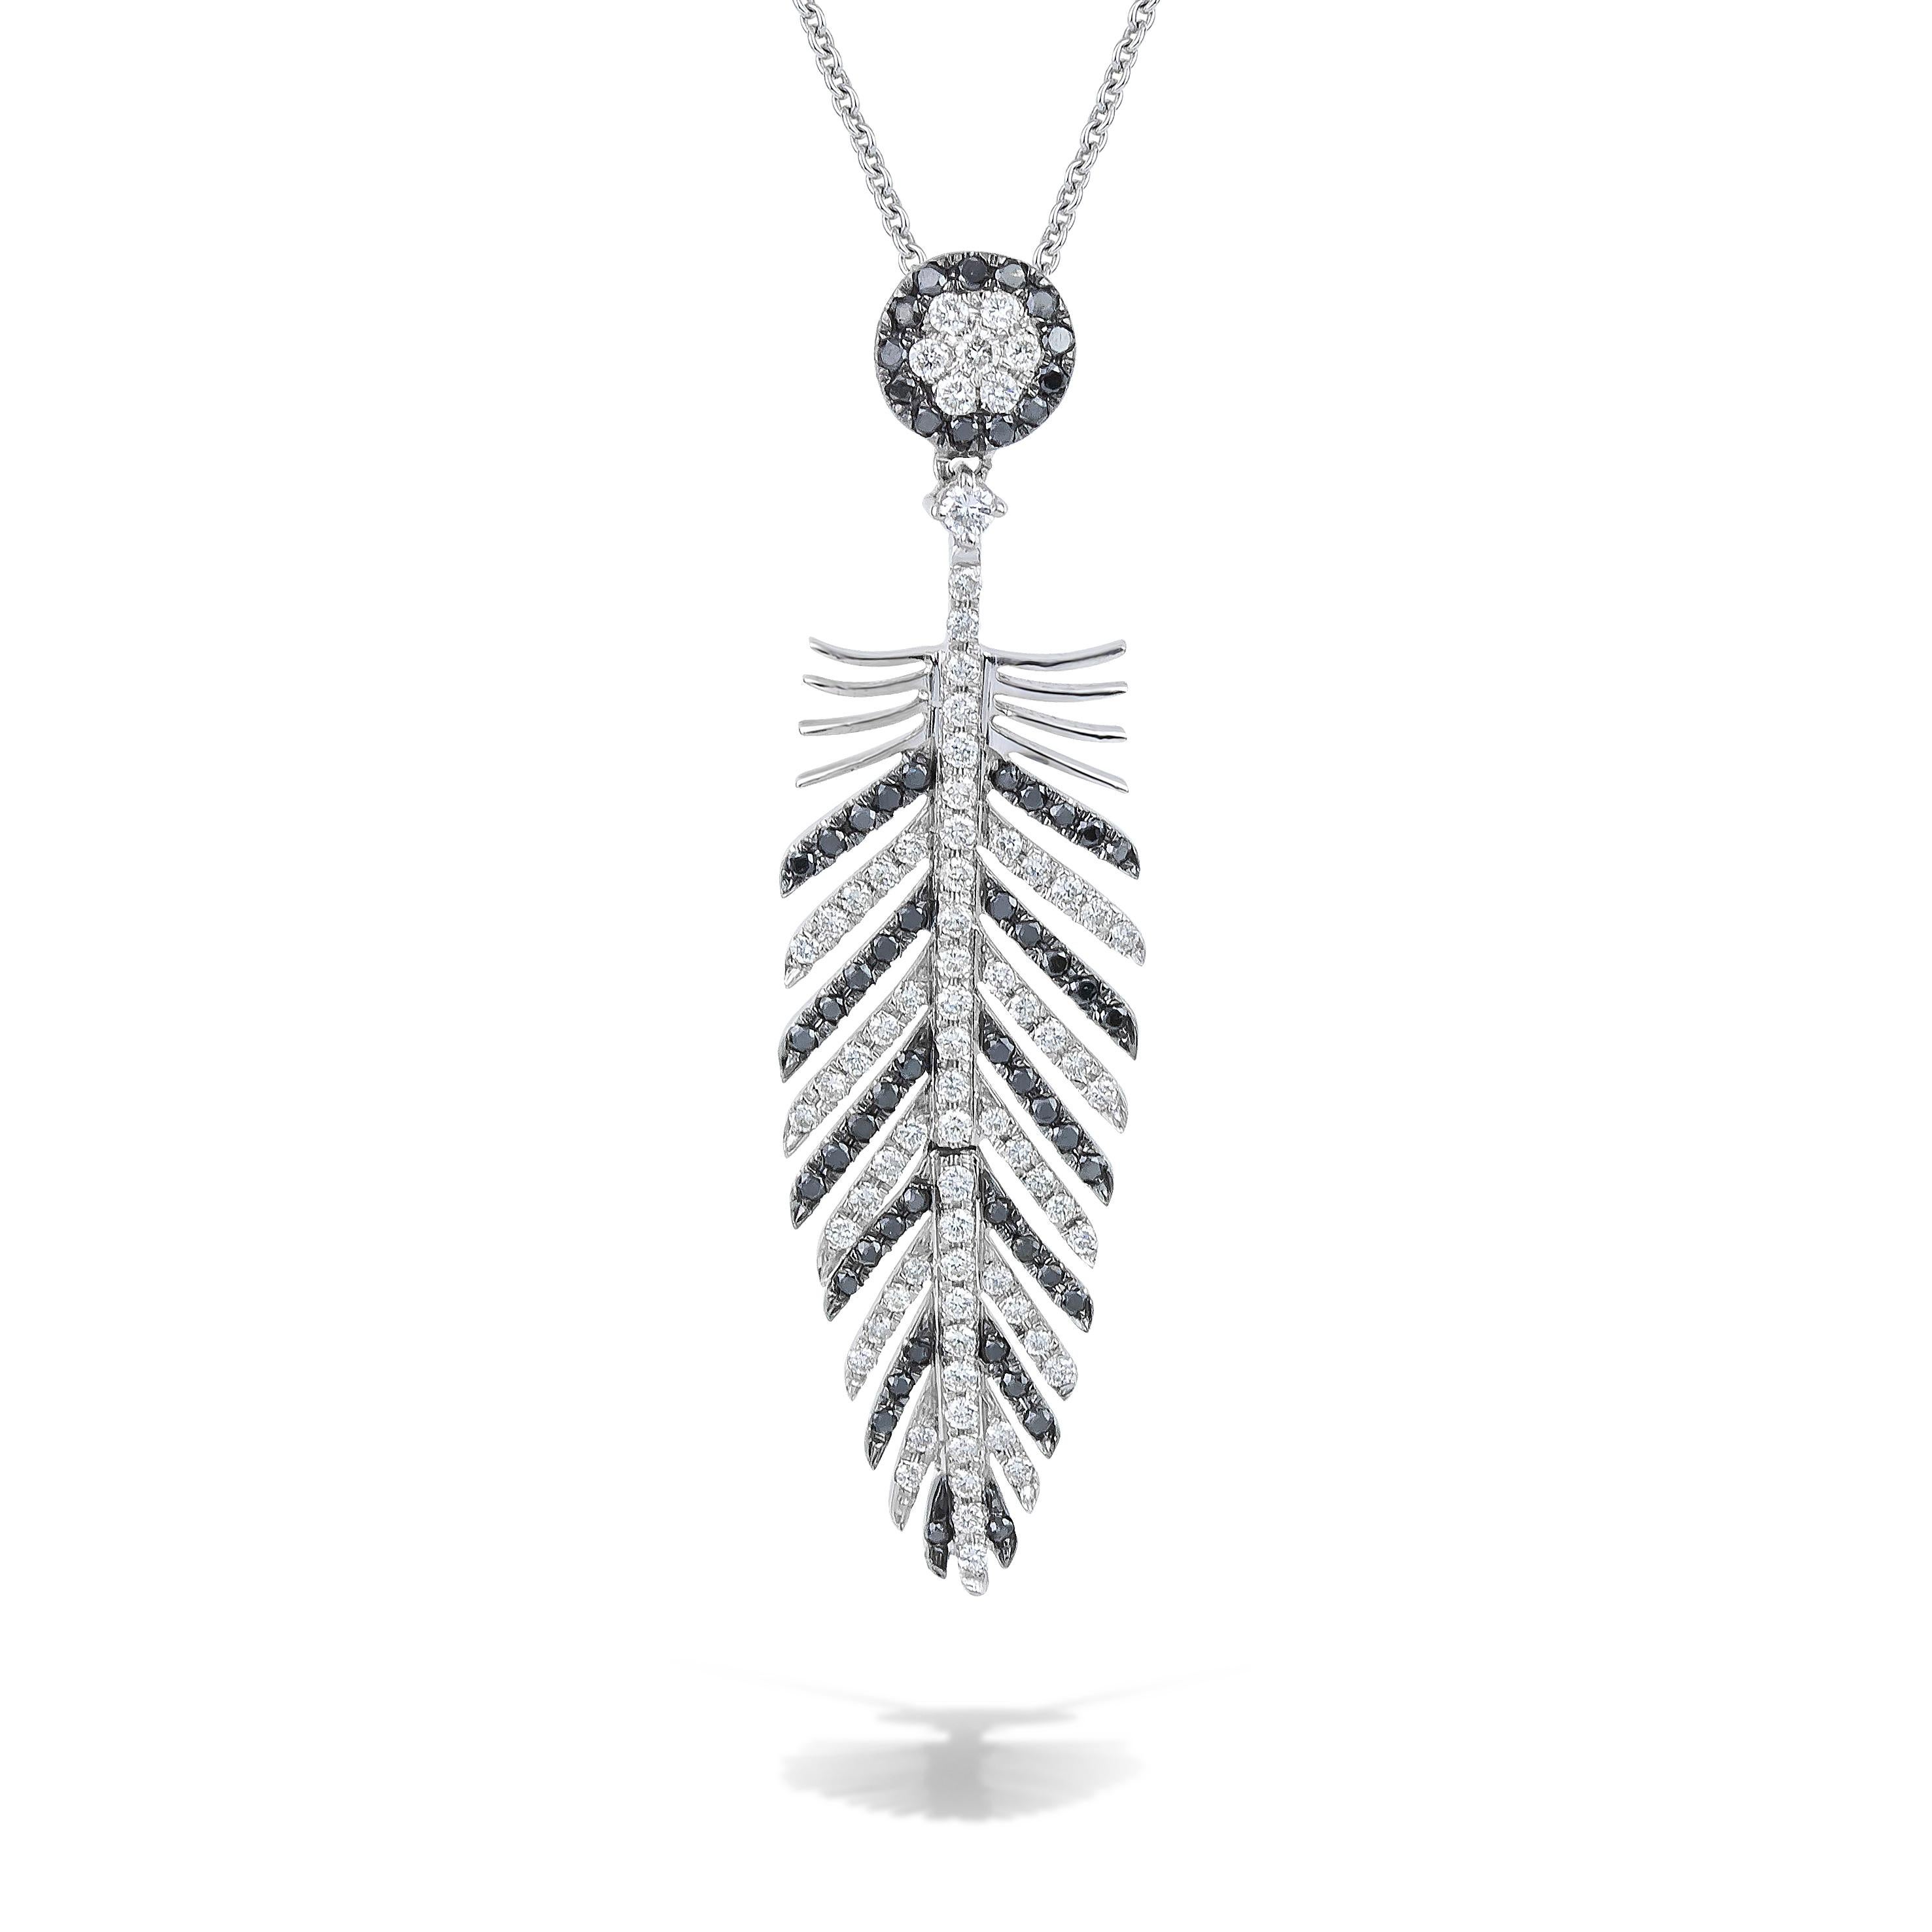 Unique Feather wing pendant necklace with black and white brilliant cut diamonds, handcrafted in 18Kt white gold. 
The white diamonds contrast sharply with the black ones, reflecting and absorbing the light. This One-Of-A-Kind pendant necklace